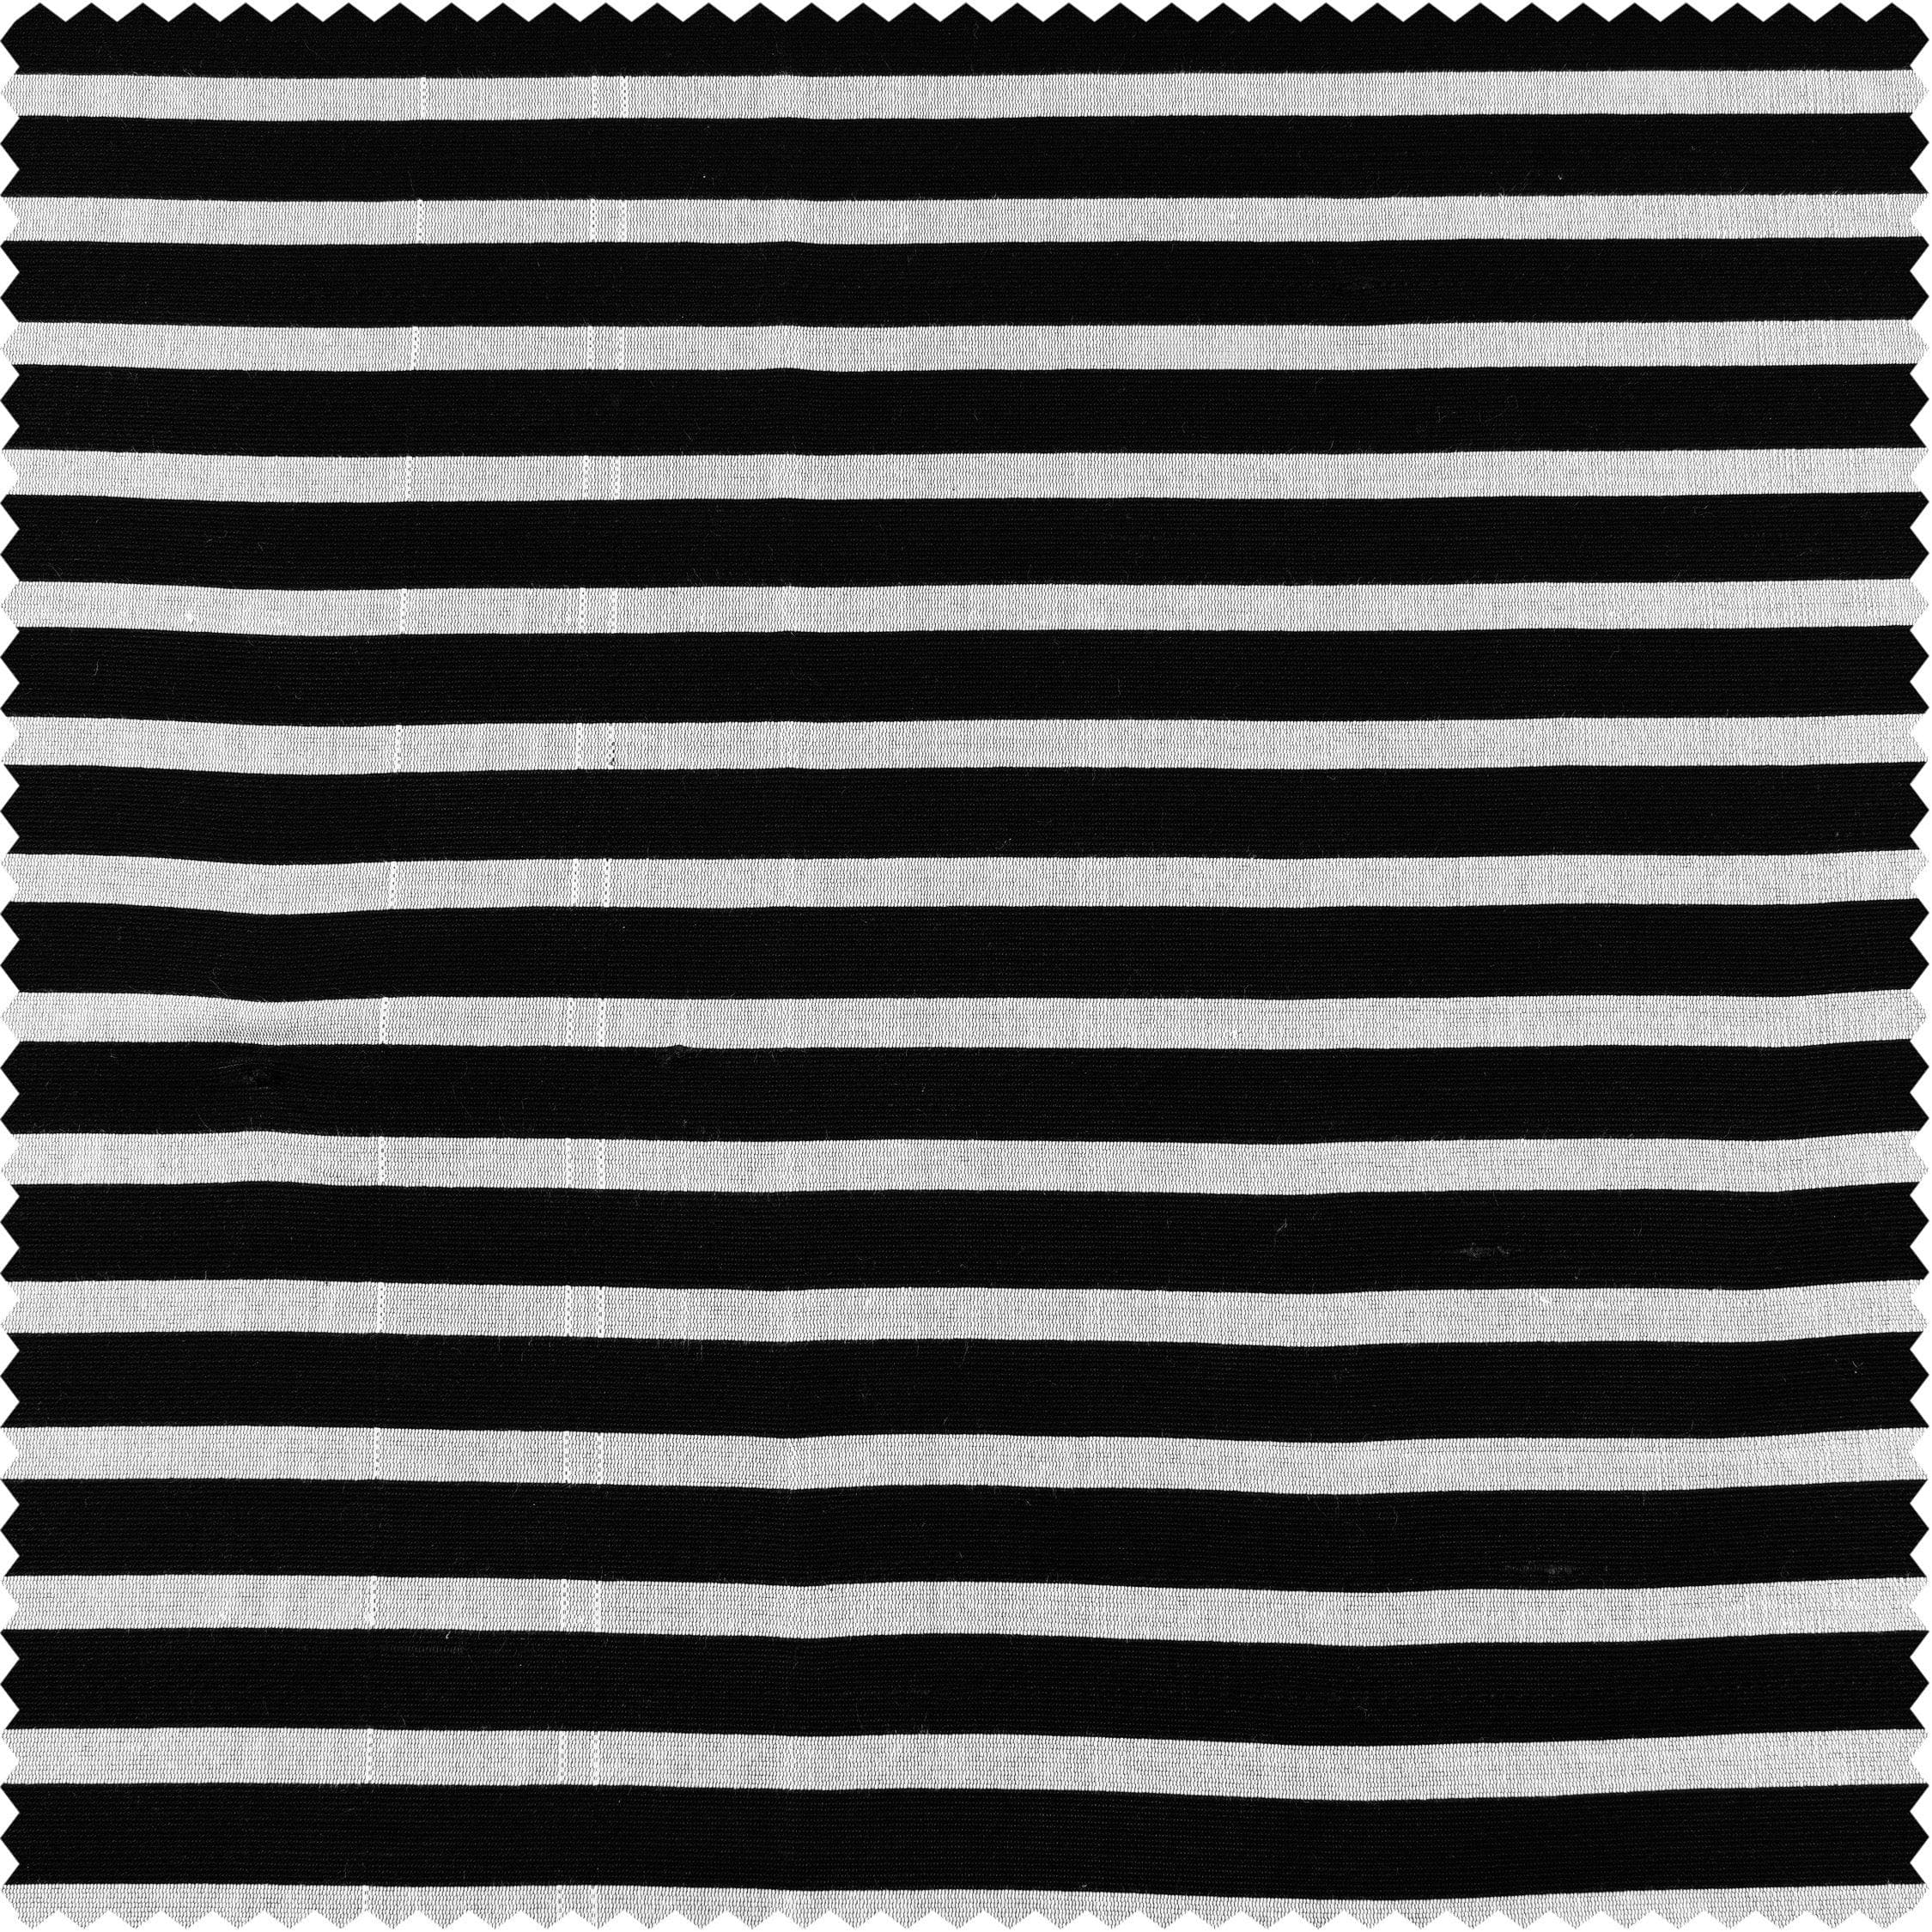 Chic Silver & Black Striped Hand Weaved Cotton Swatch